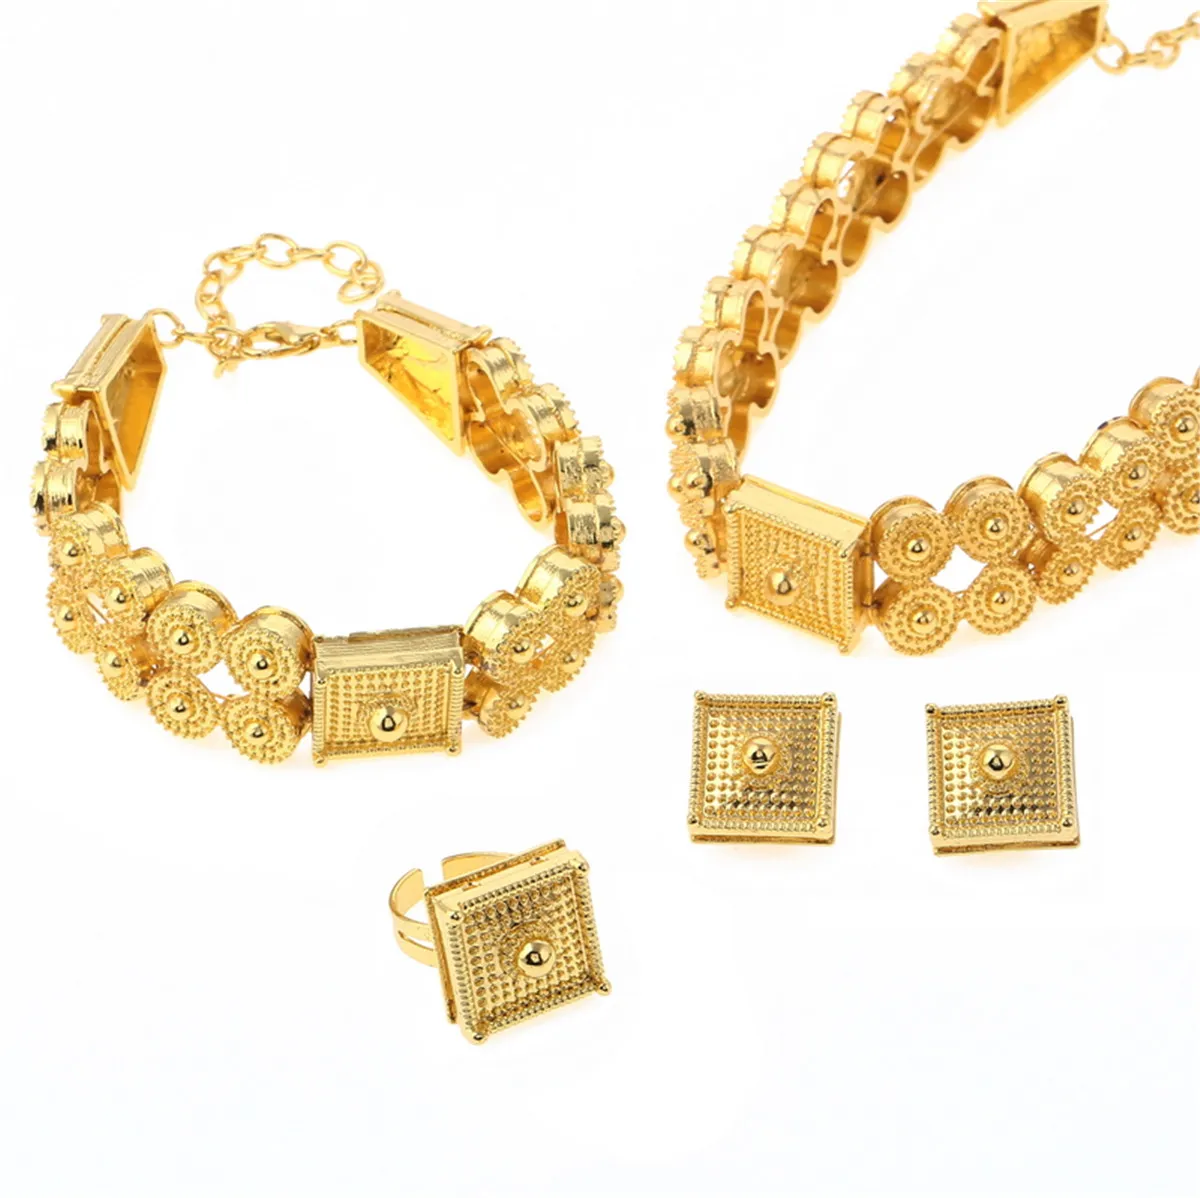 Ethiopian Jewelry Set Gold Color Chokers Necklace Bracelet Earrings Ring For Women Eritrea Habesha African